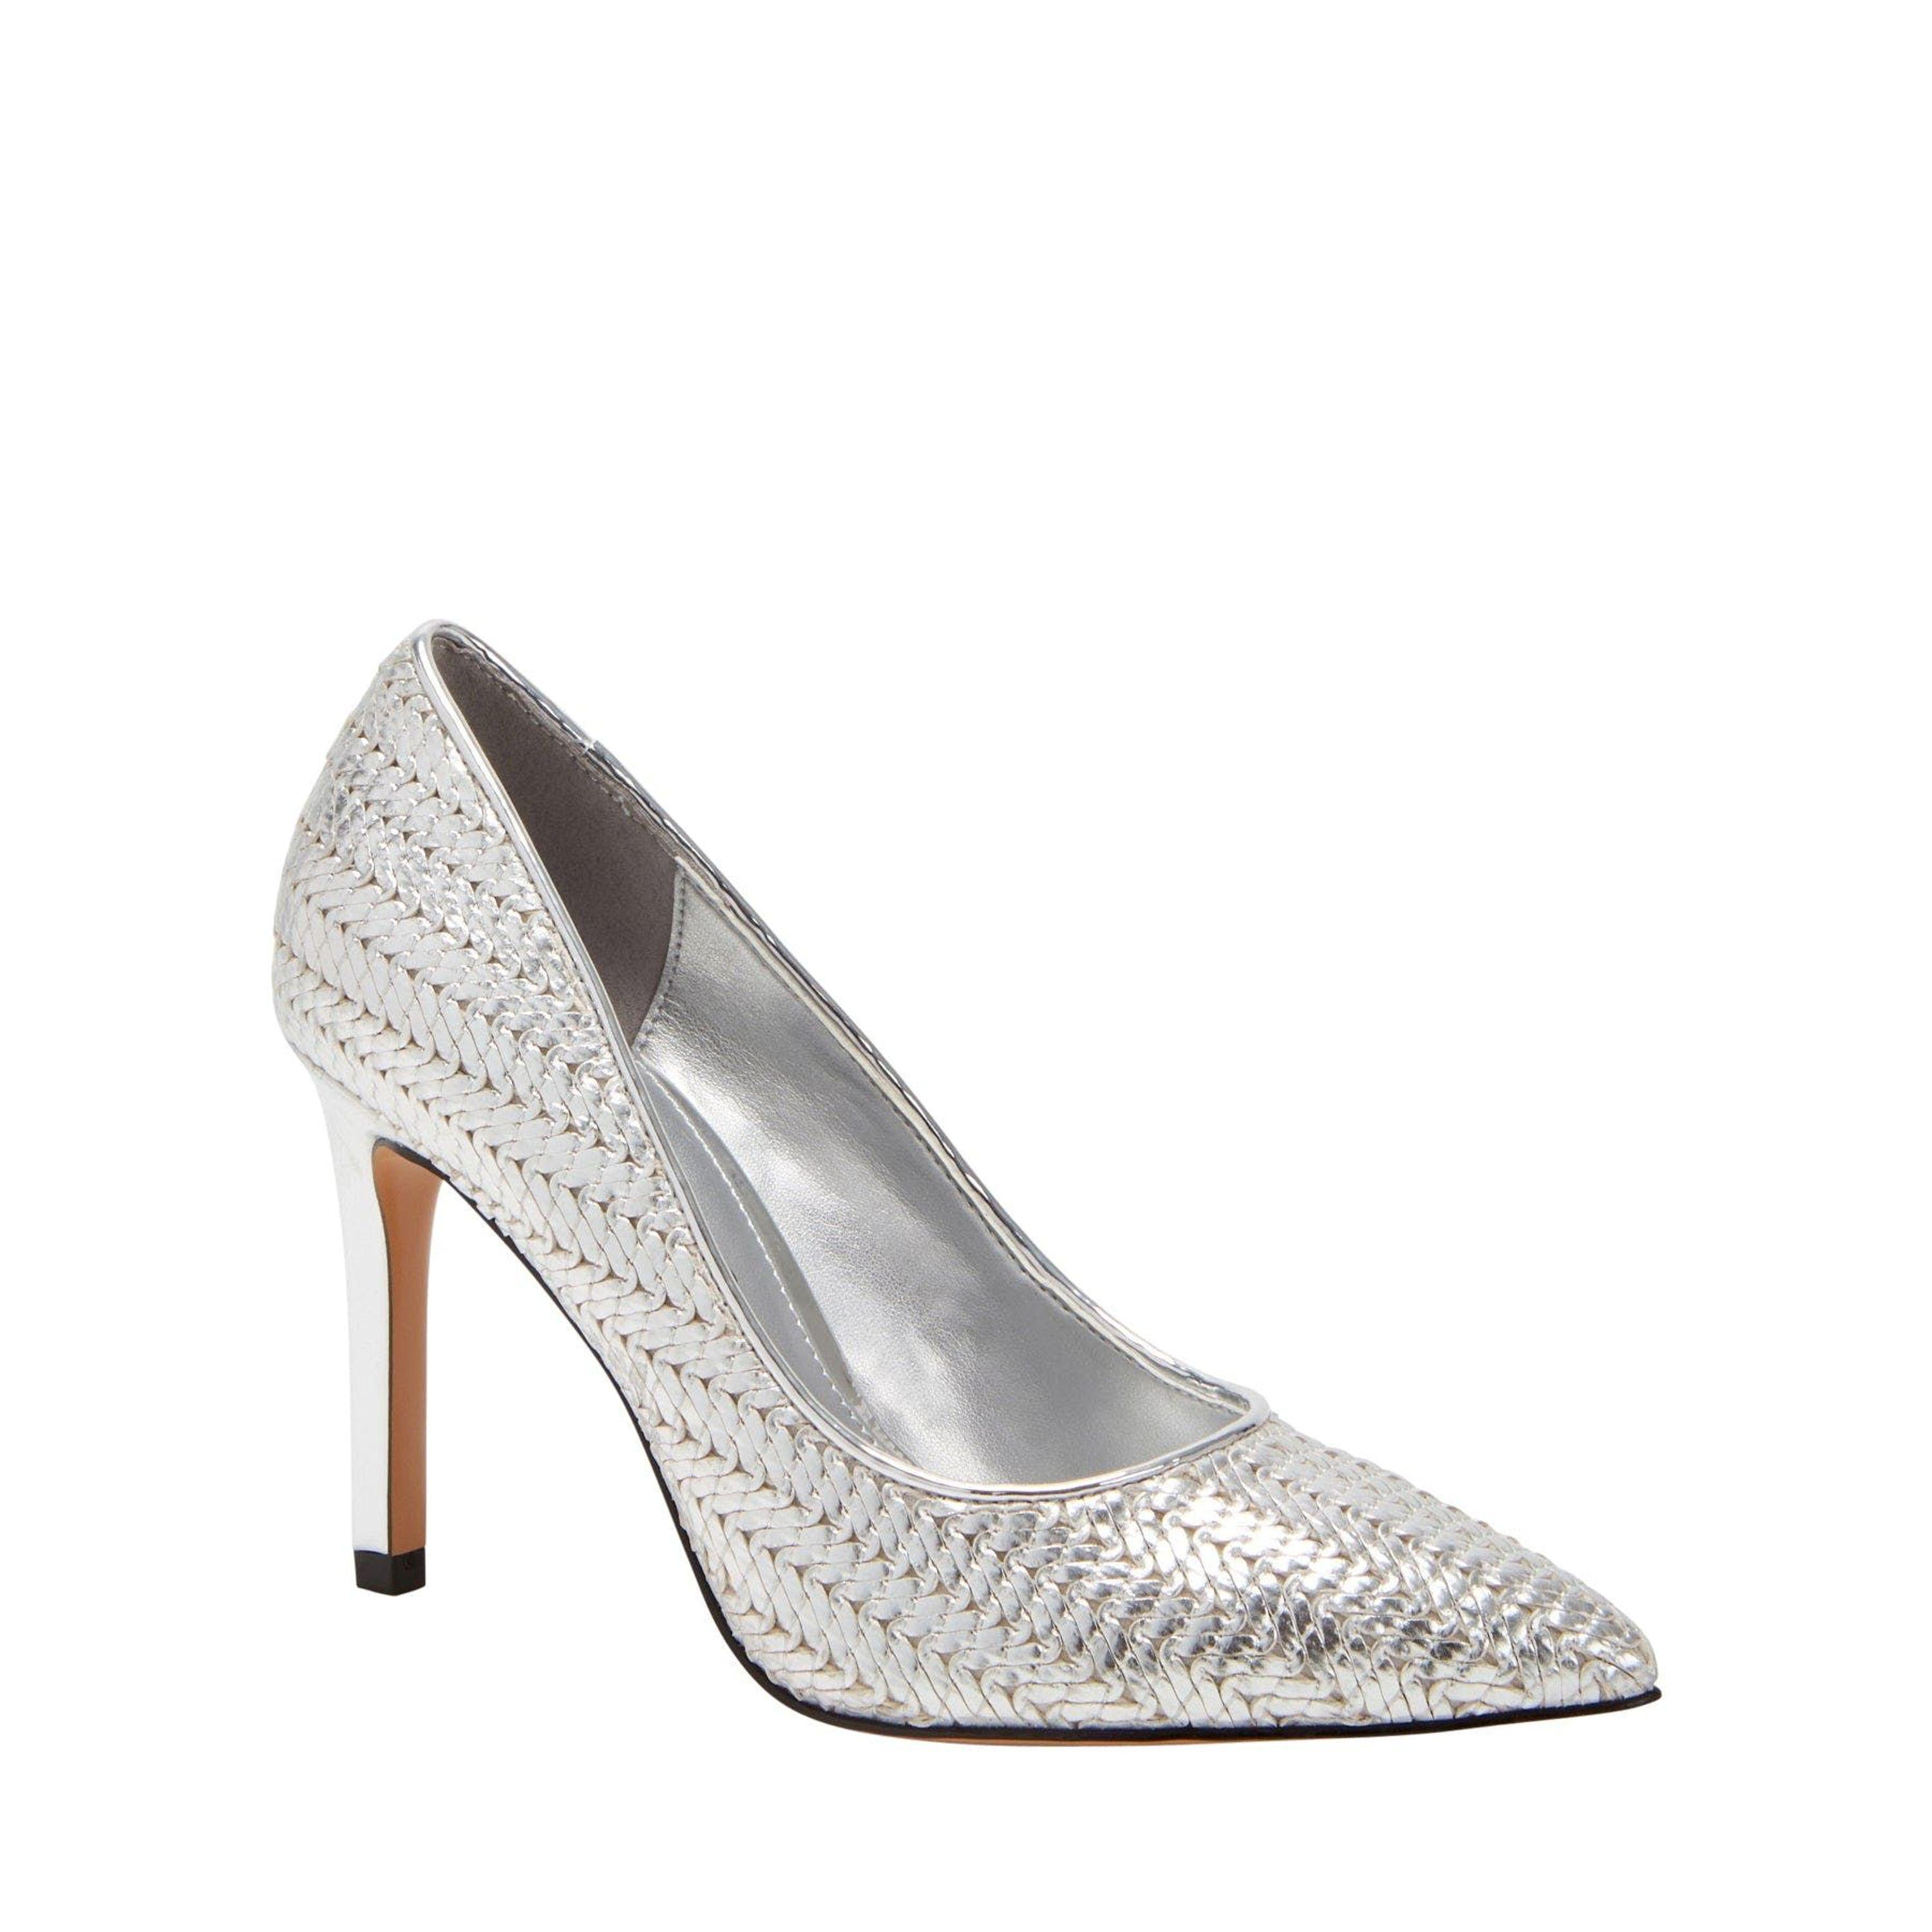 Katy Perry The Marcella Pump Heels in White | Lyst